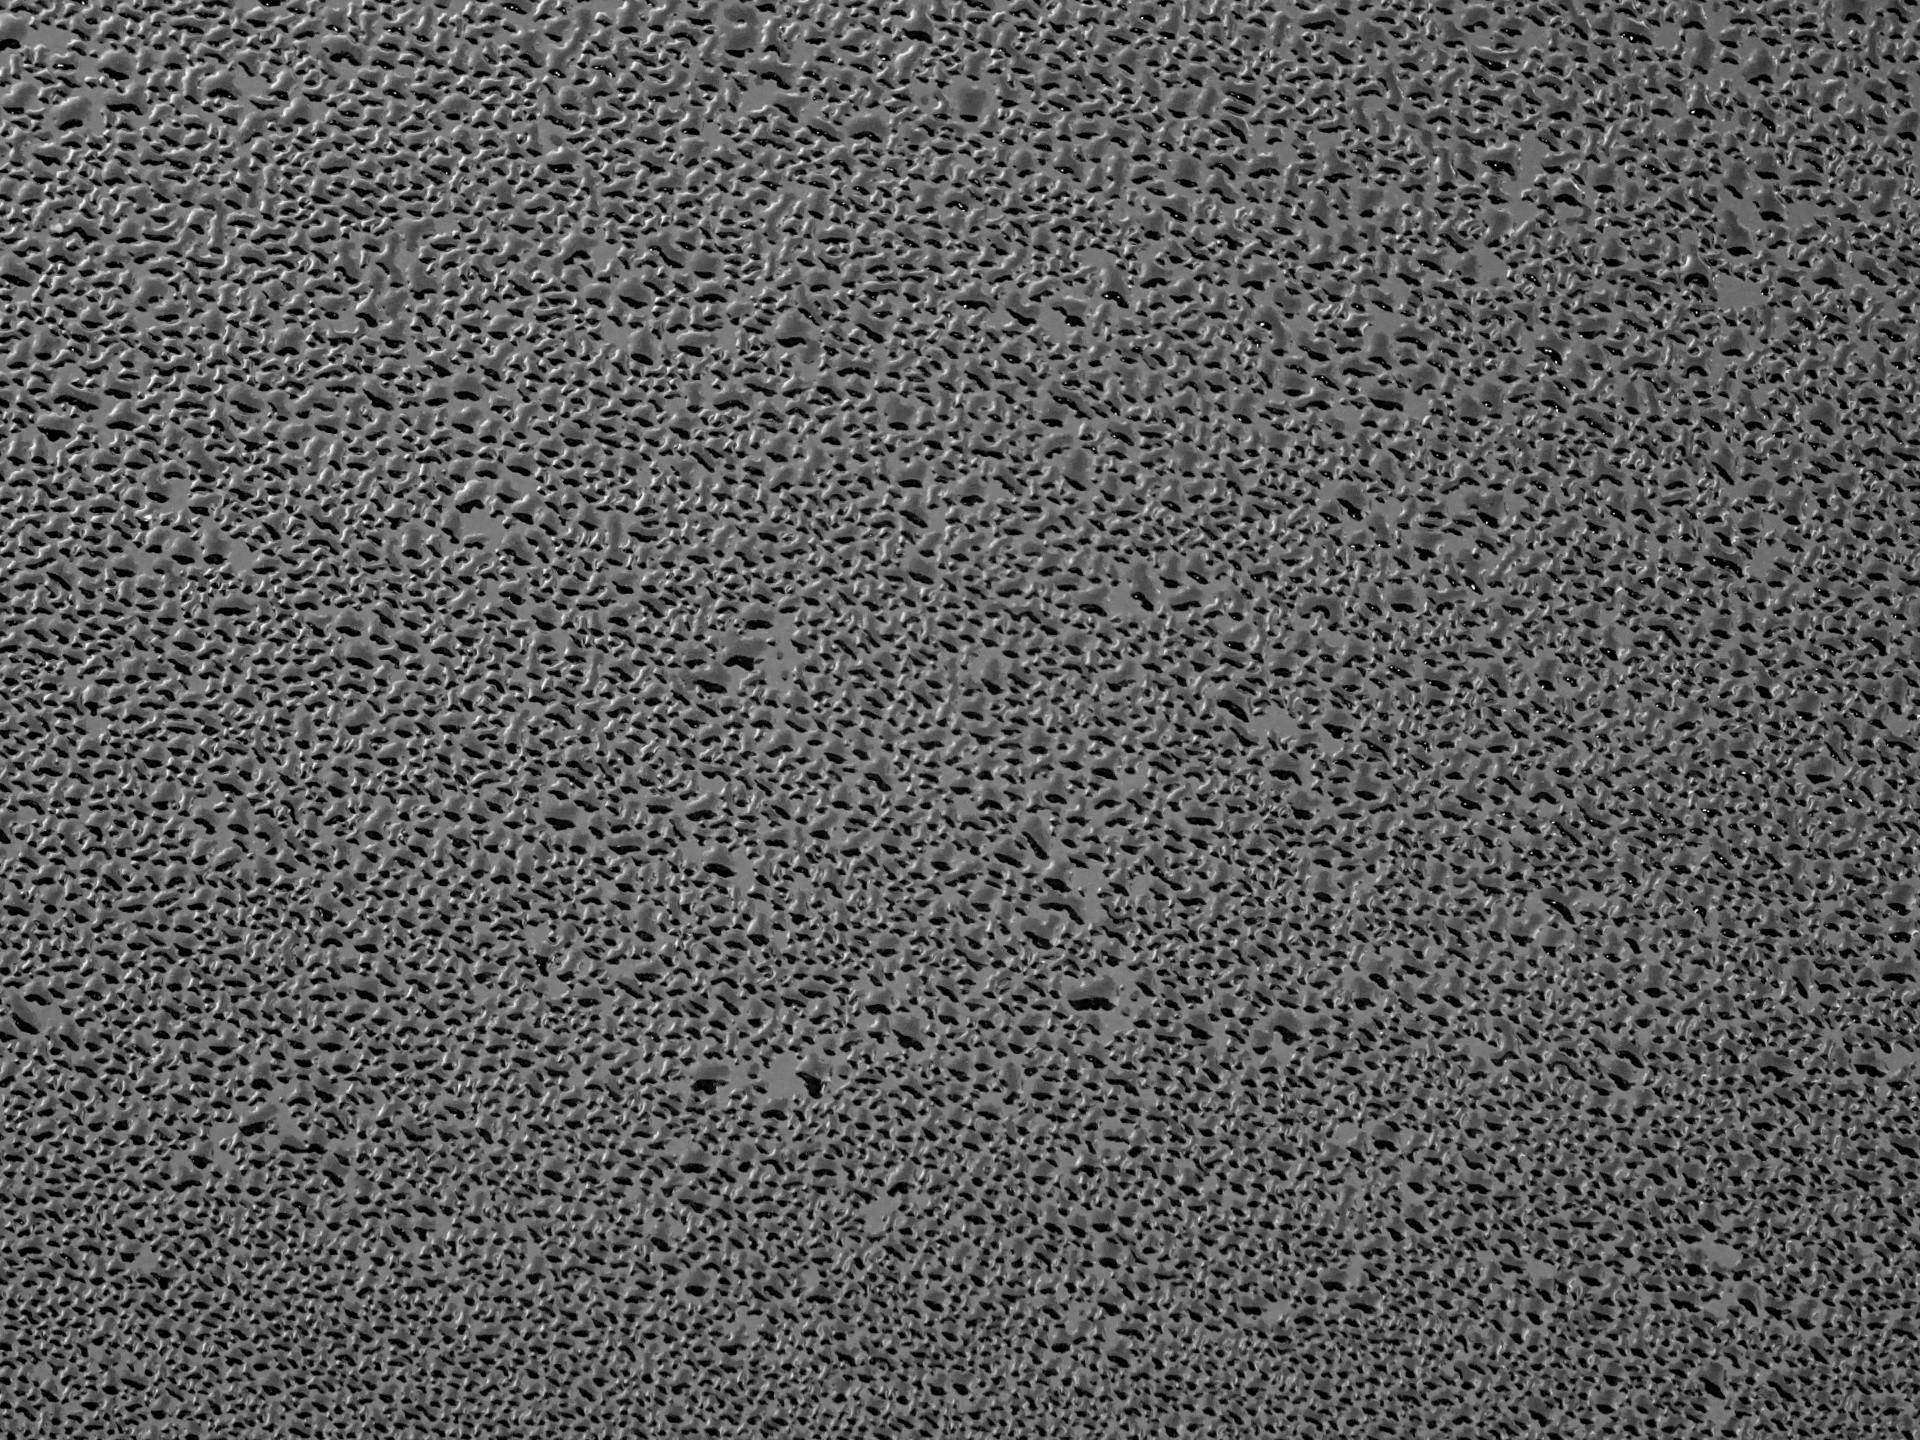 1920x1440 Gray Water Droplets Background